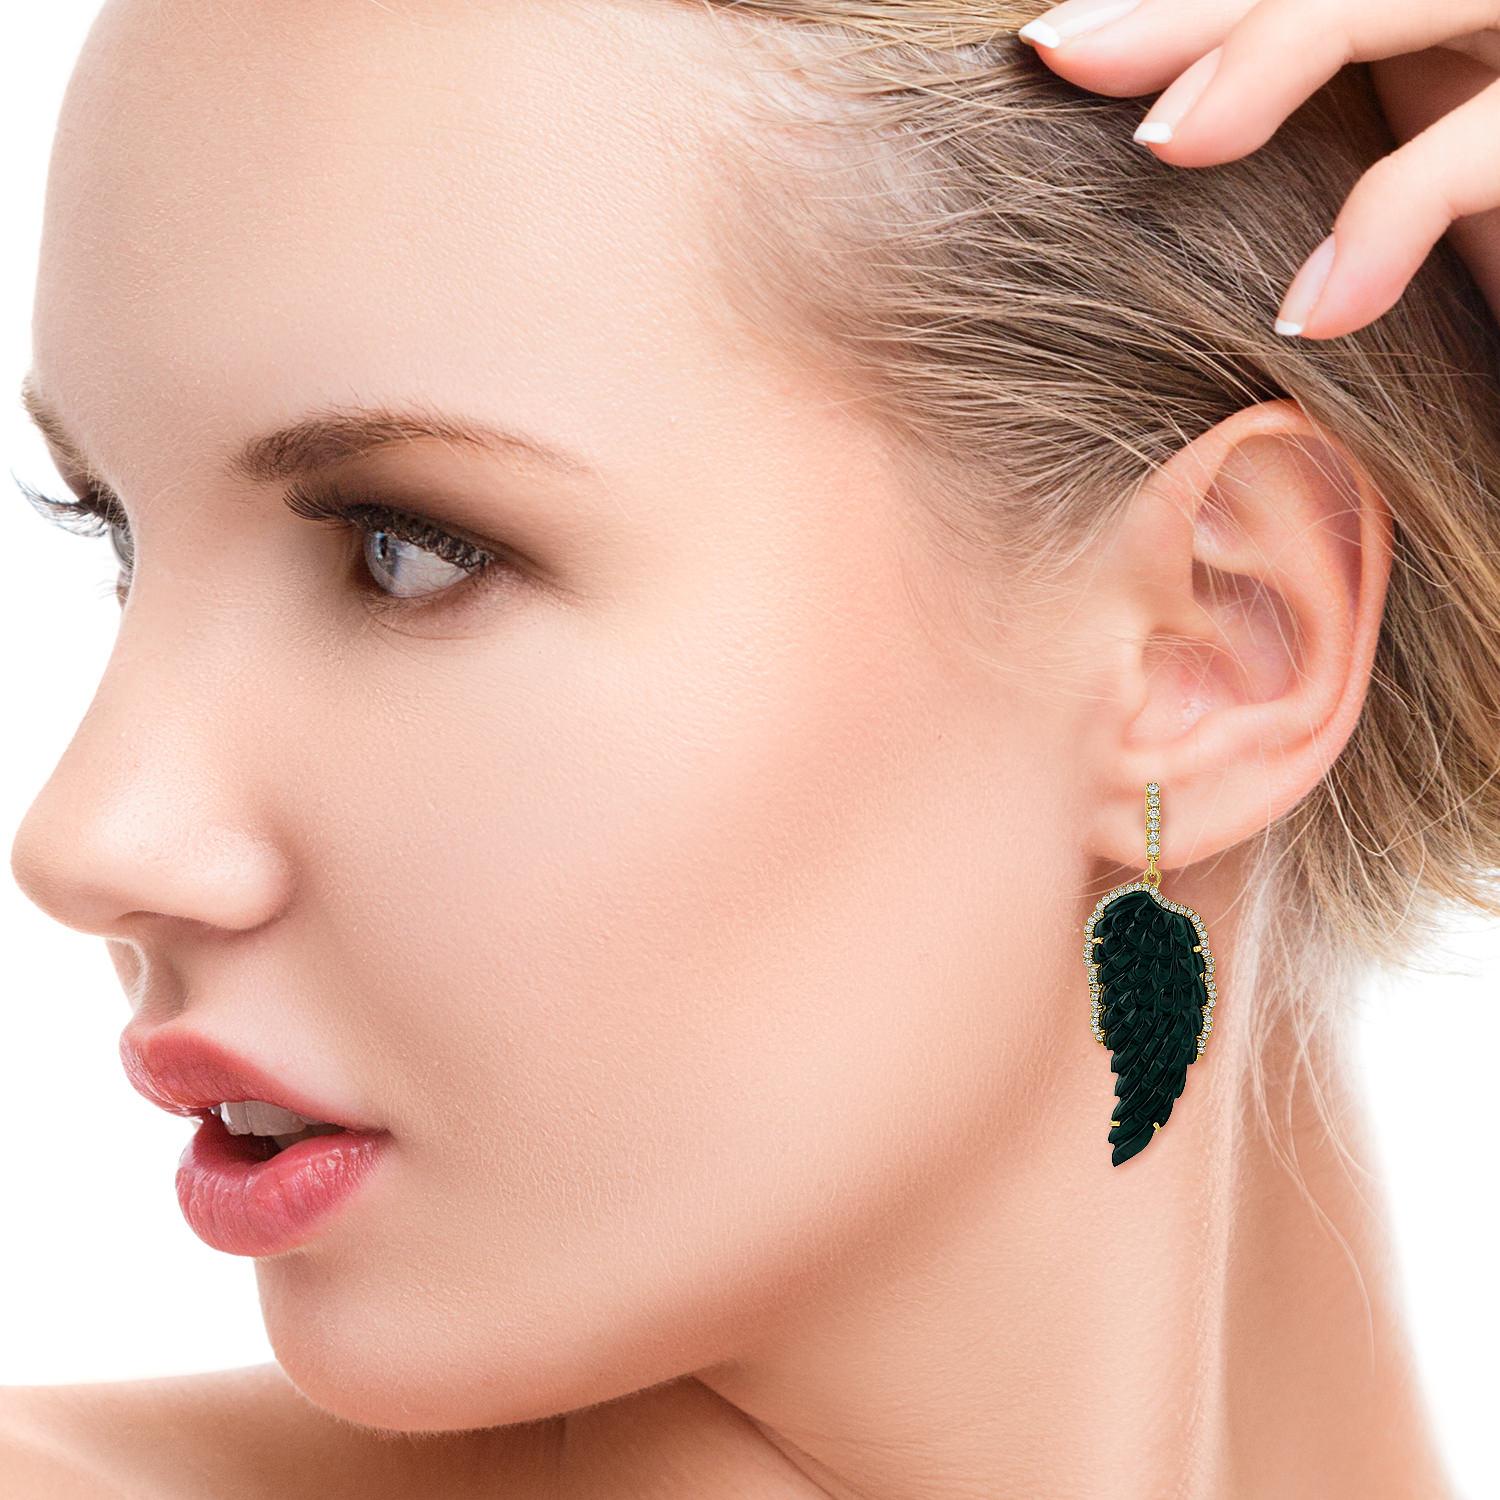 Handcrafted from 18-karat gold, these stunning feather earrings are set with 35.85 carats carved malachite and .77 carats of sparkling diamonds.

FOLLOW  MEGHNA JEWELS storefront to view the latest collection & exclusive pieces.  Meghna Jewels is